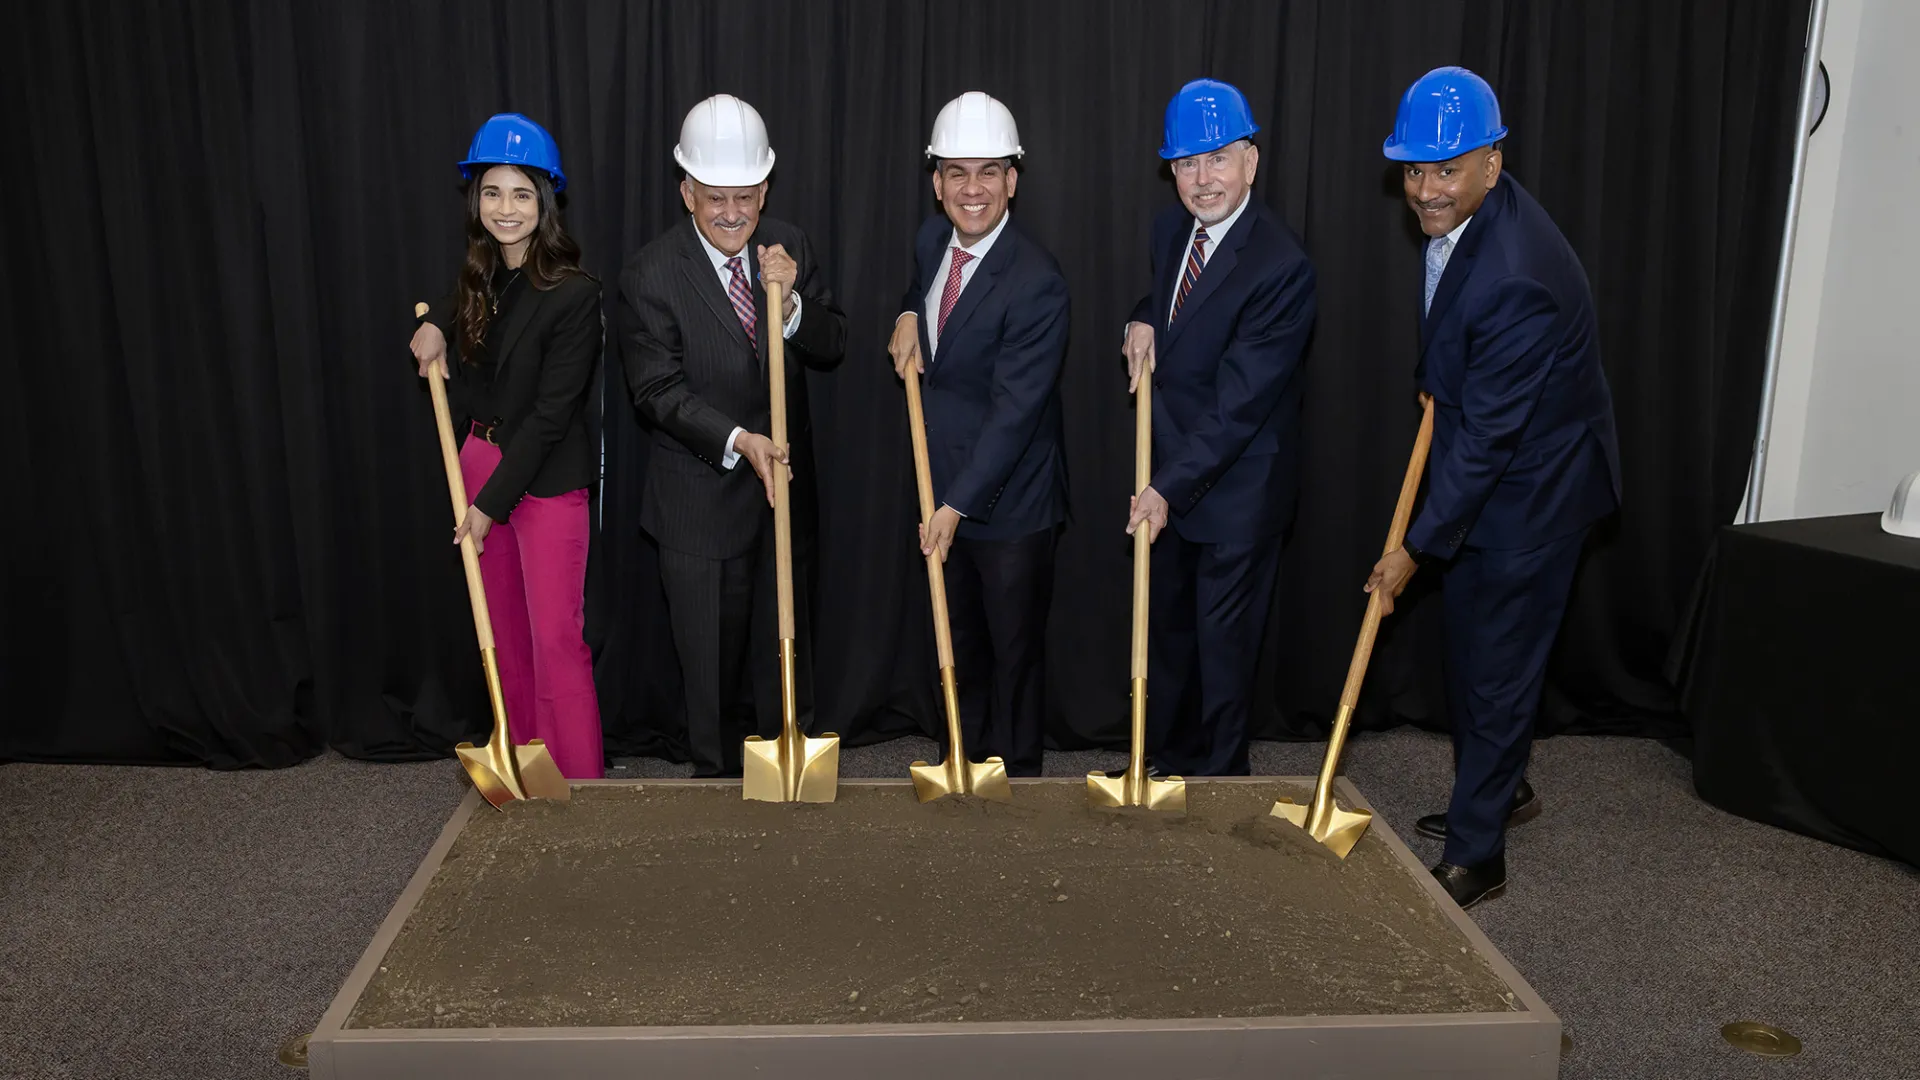 From left: Sonia Otte, founding director of the developing Master of Science in Physician Assistant program; Tomás D. Morales, CSUSB president; U.S. Rep. Pete Aguilar, D-San Bernardino; state Sen. Richard Roth, D-Riverside; Rafik Mohamed, CSUSB provost and vice president of Academic Affairs, at the ceremonial groundbreaking event on April 26 for the MSPA program’s building.